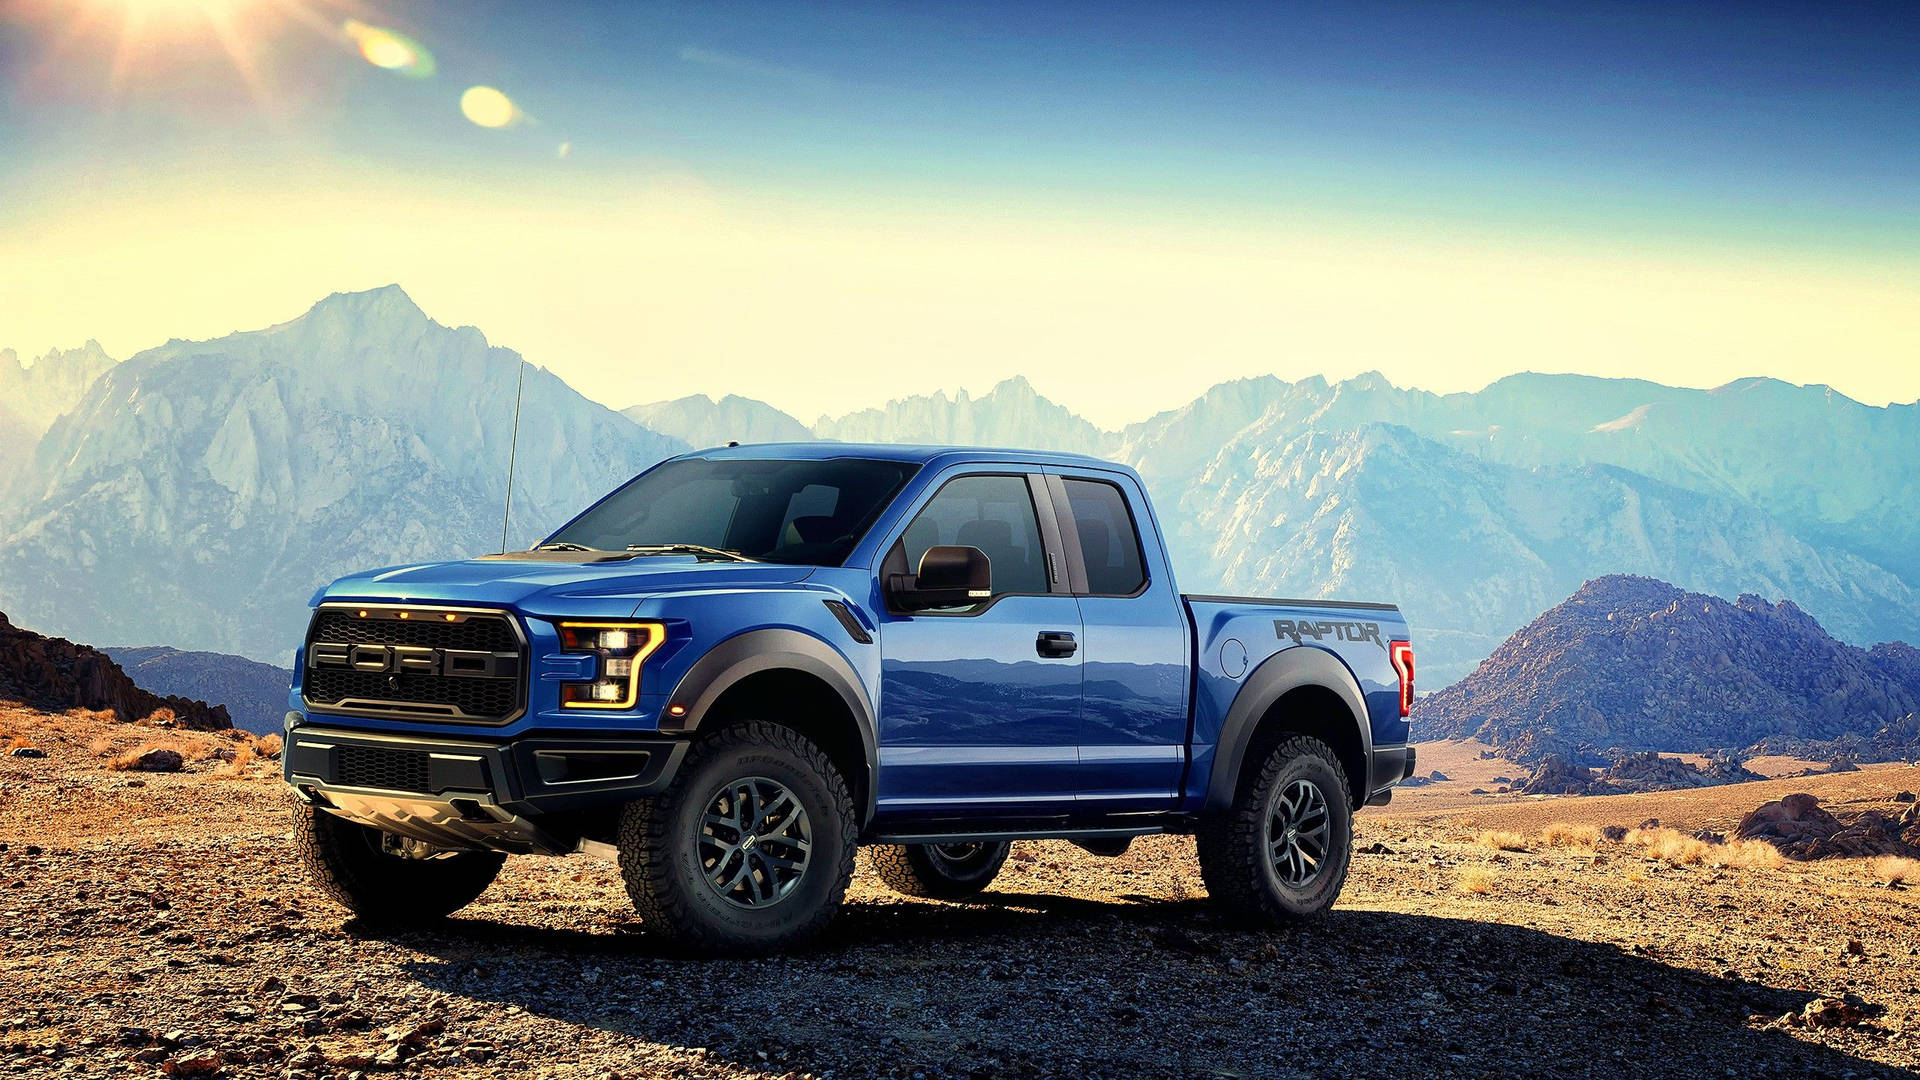 Ford Raptor With View Of Mountains Wallpaper